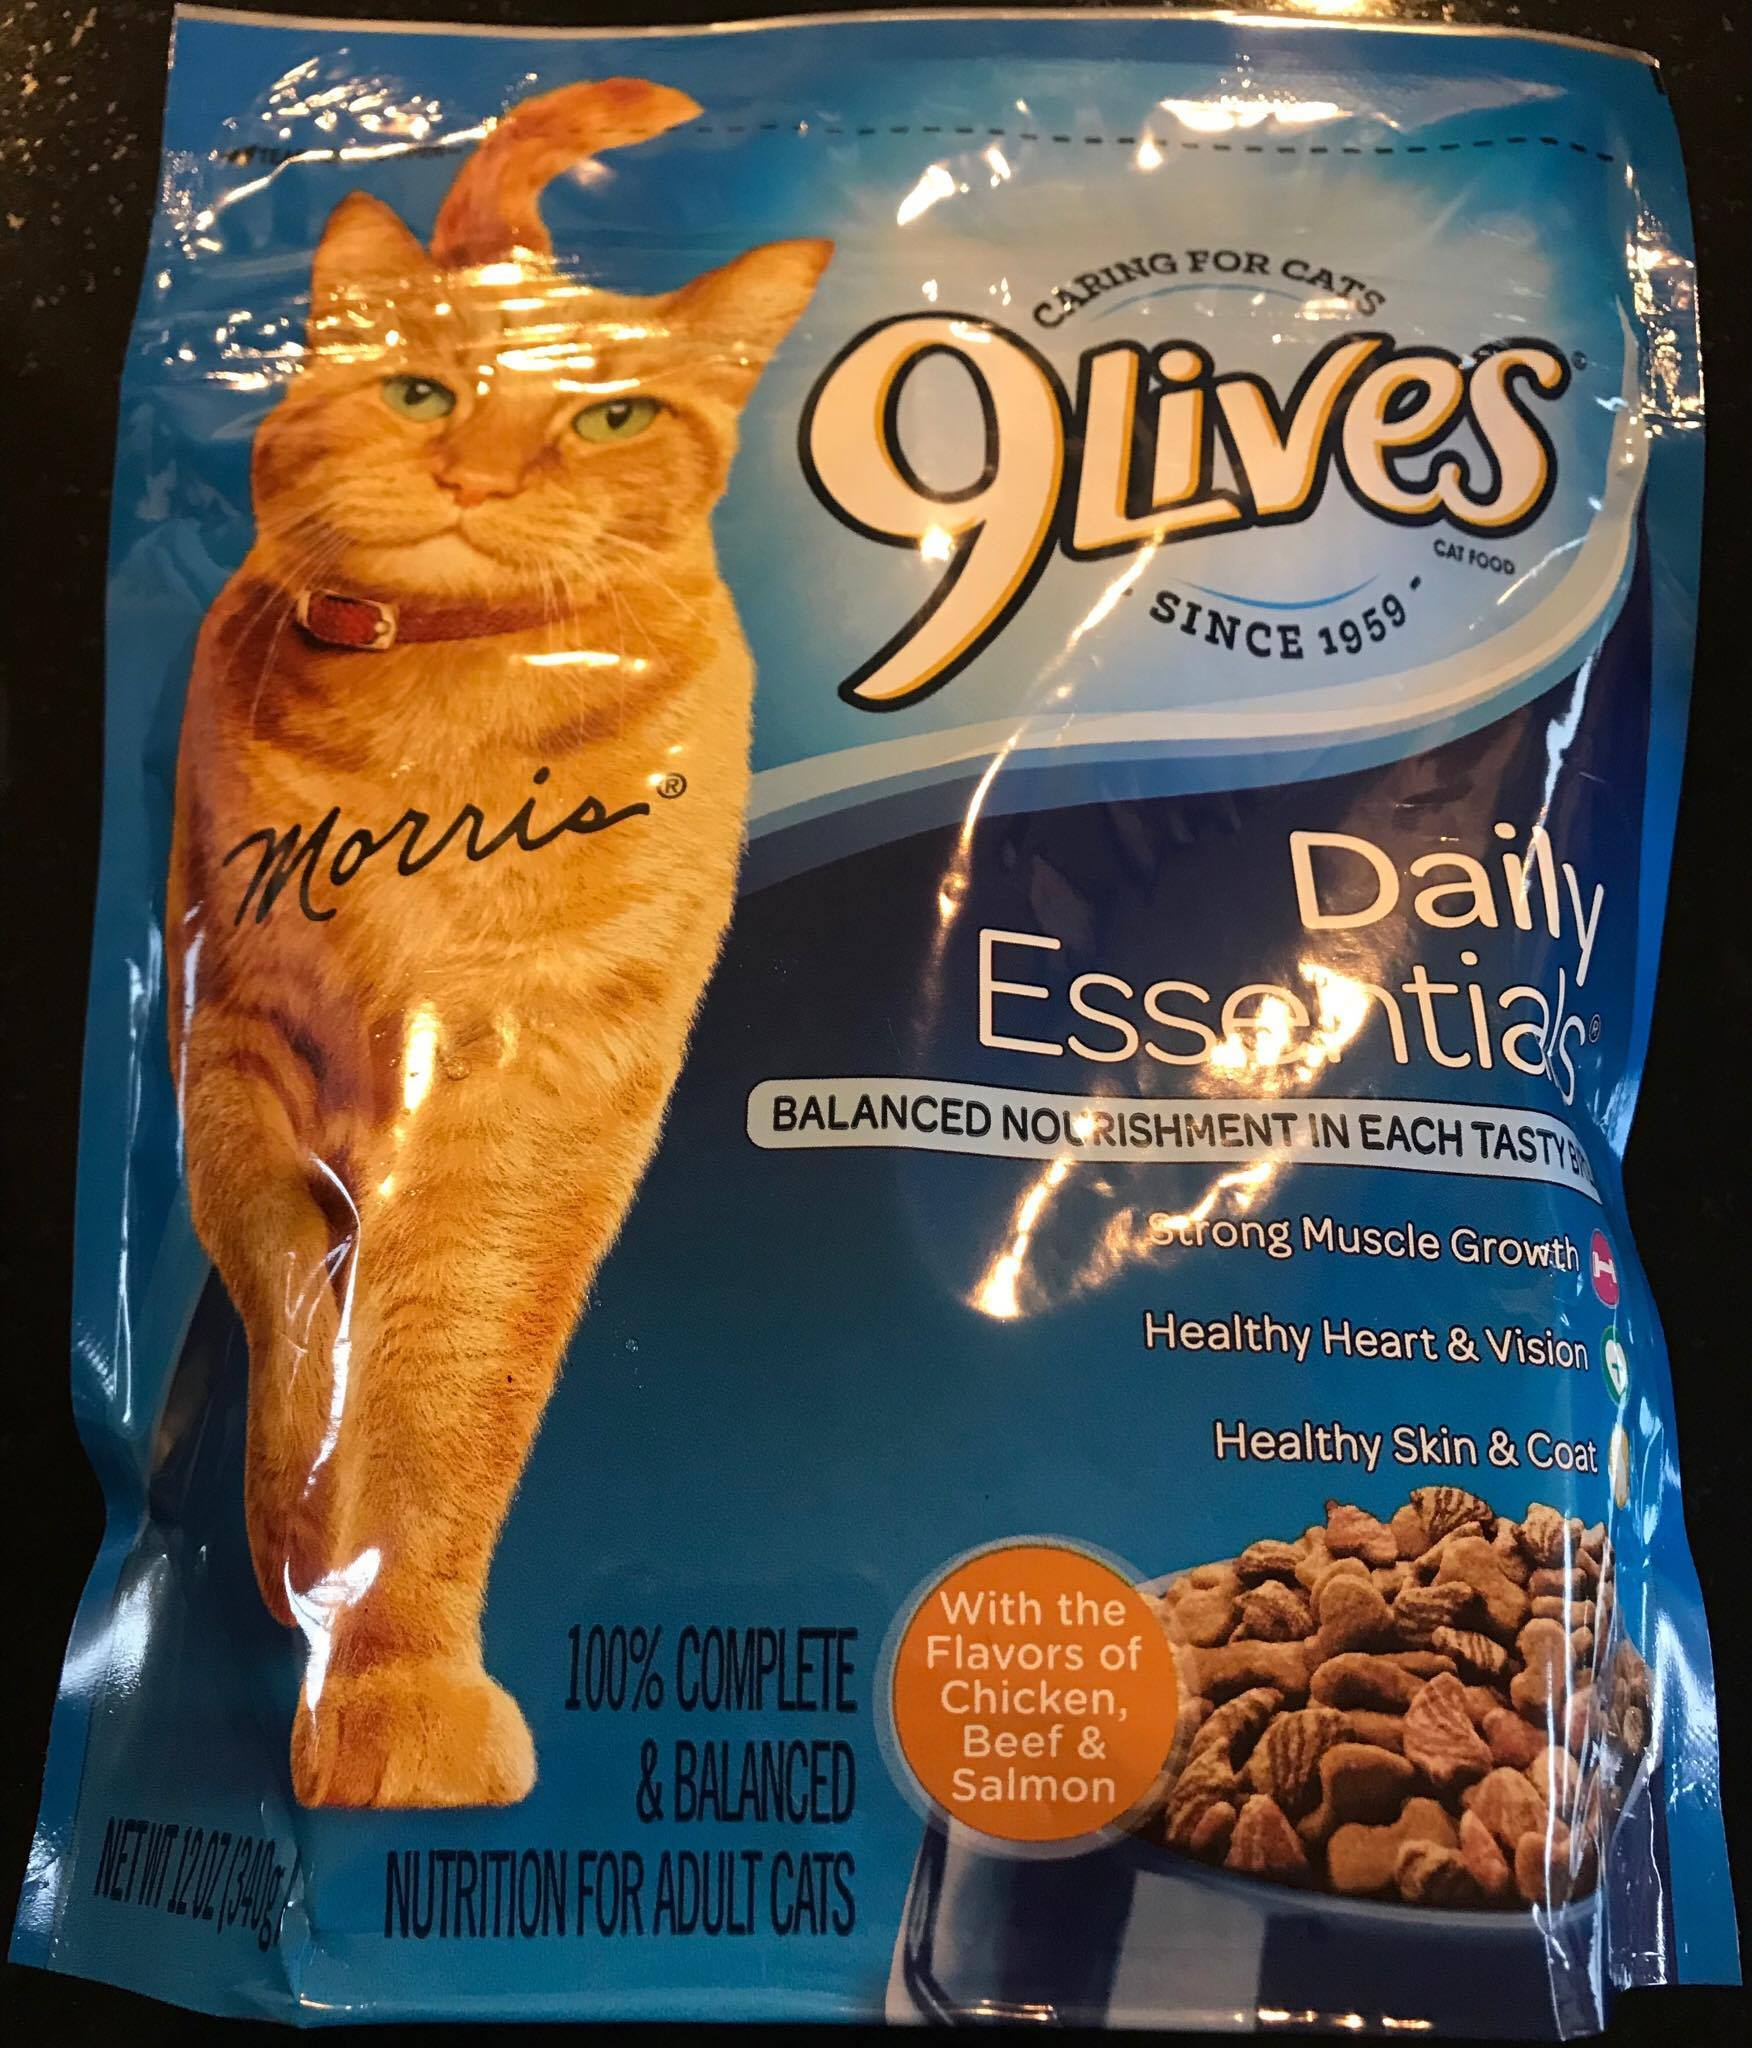 Confirmed! Free 9Lives Cat Food! Print Now!! #couponcommunity - Free Printable 9 Lives Cat Food Coupons